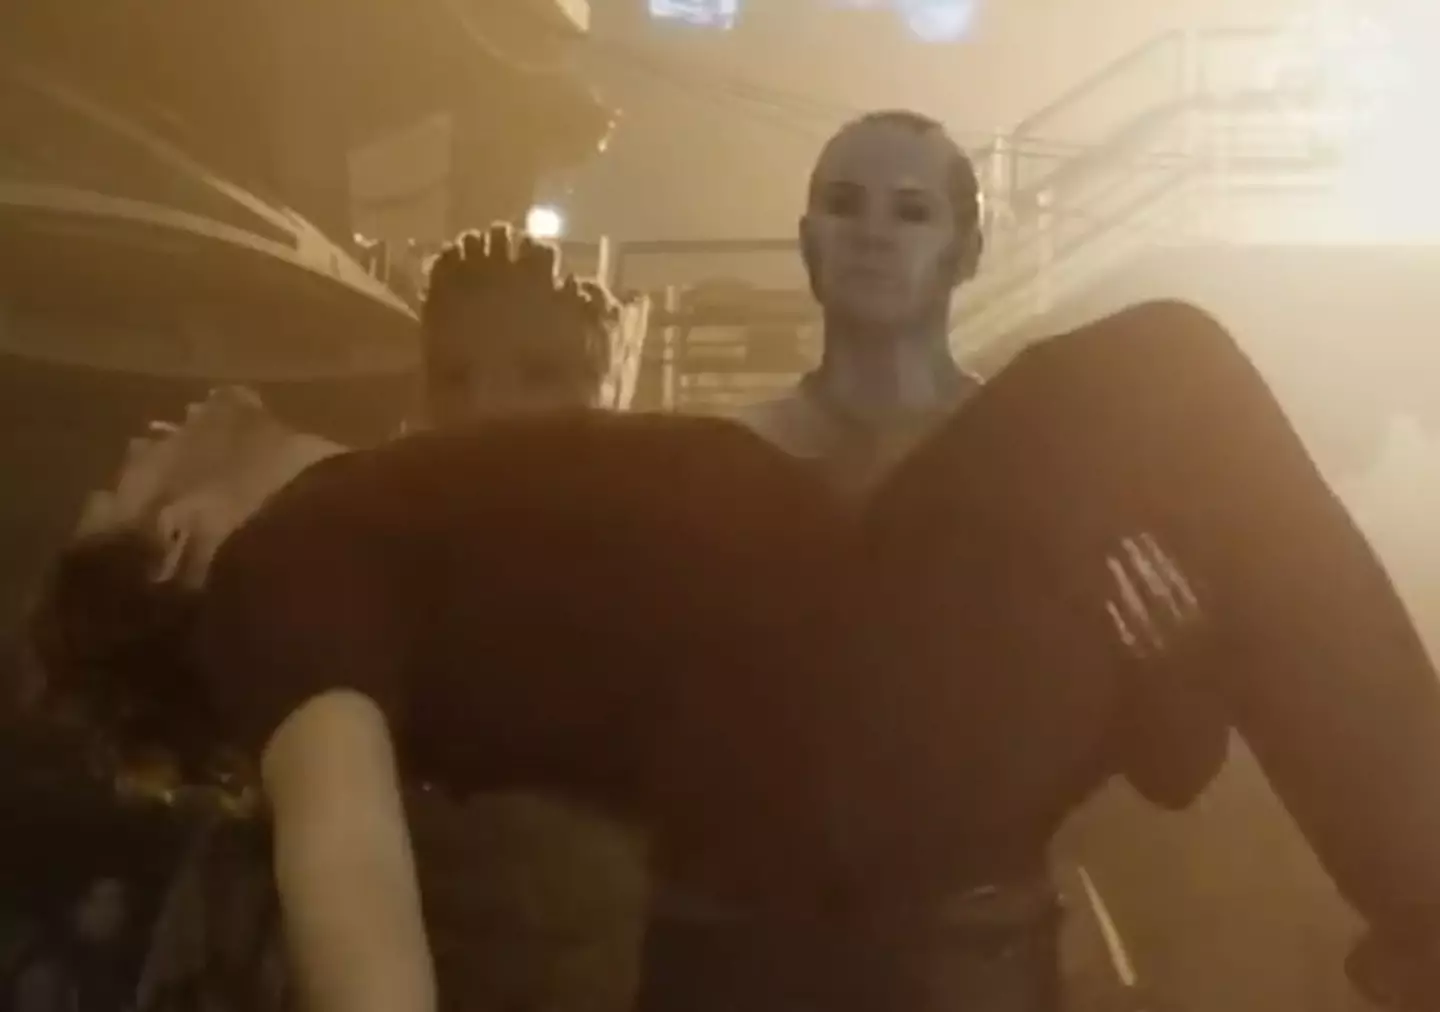 The body of Star Lord (Chris Pratt) being carried by Nebula (Karen Gillan) is not real, it's just a dummy.